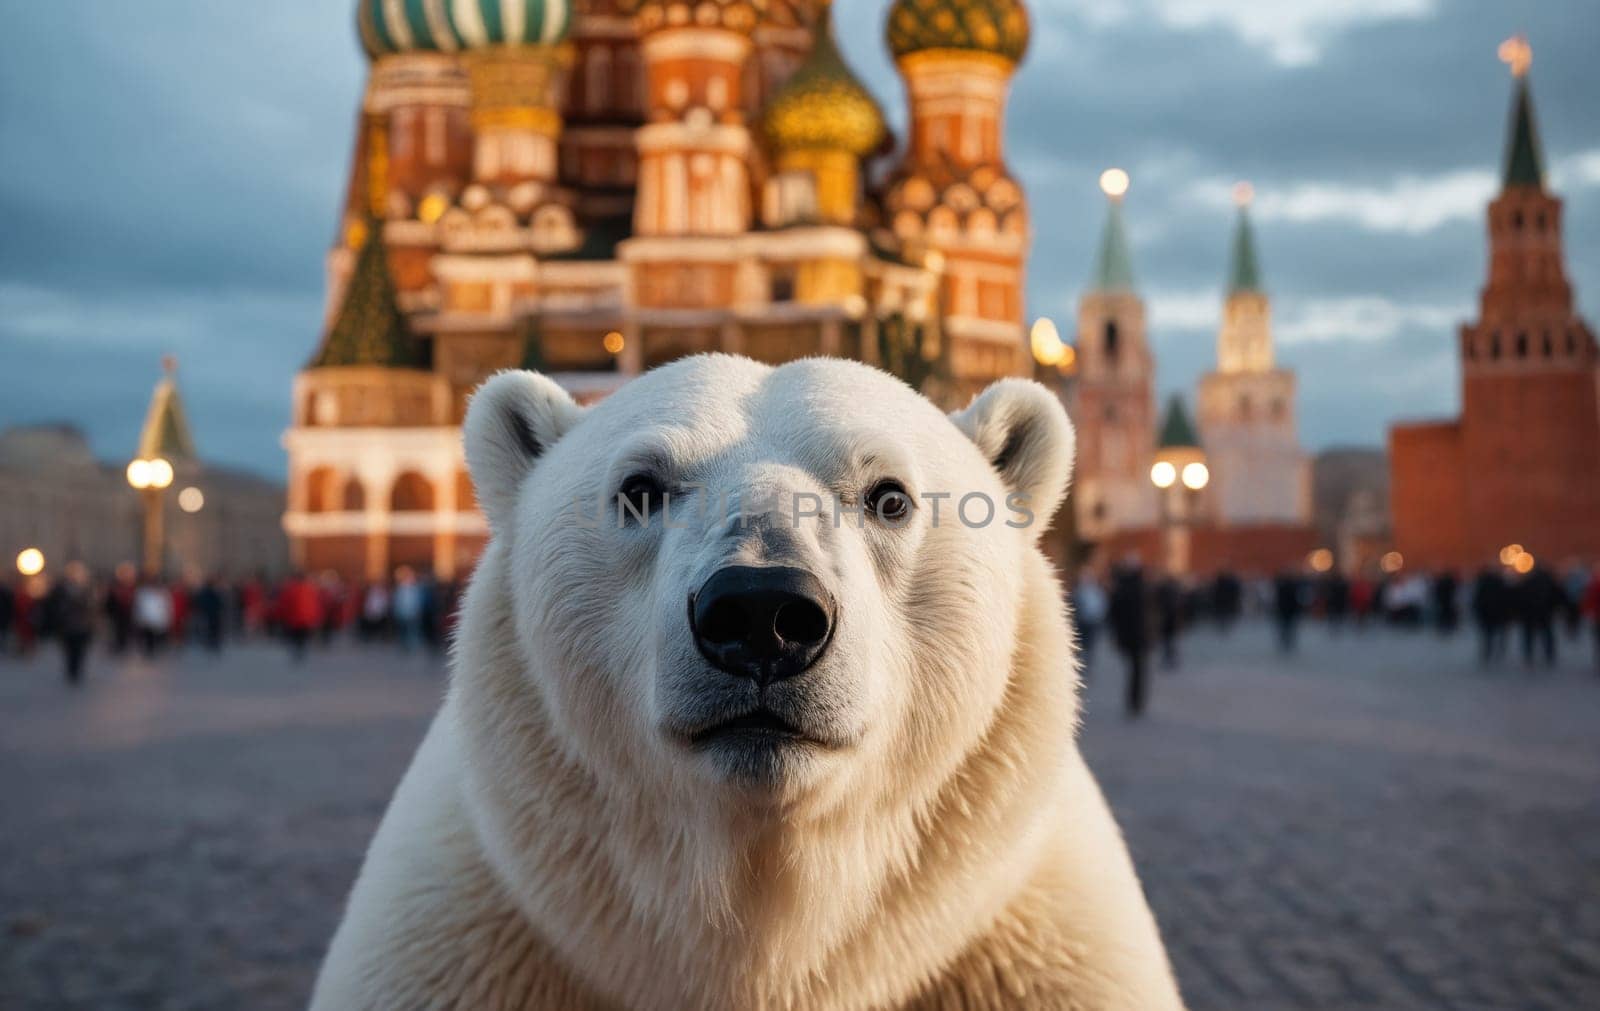 This captivating photo-manipulation showcases a polar bear in the iconic Red Square of Moscow, creating a striking, surrealistic vision.